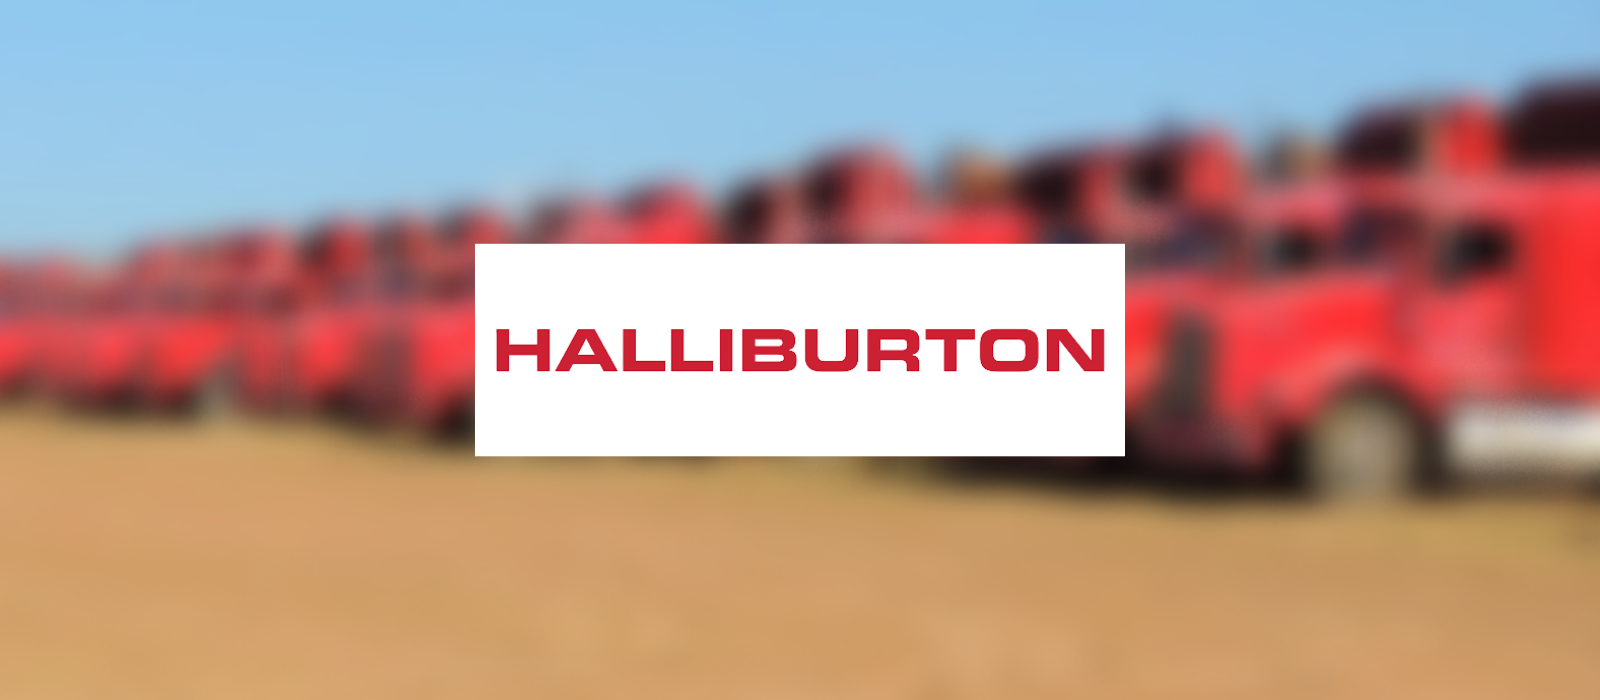 HGP to Conduct Auction From Halliburton’s Duncan, OK Site